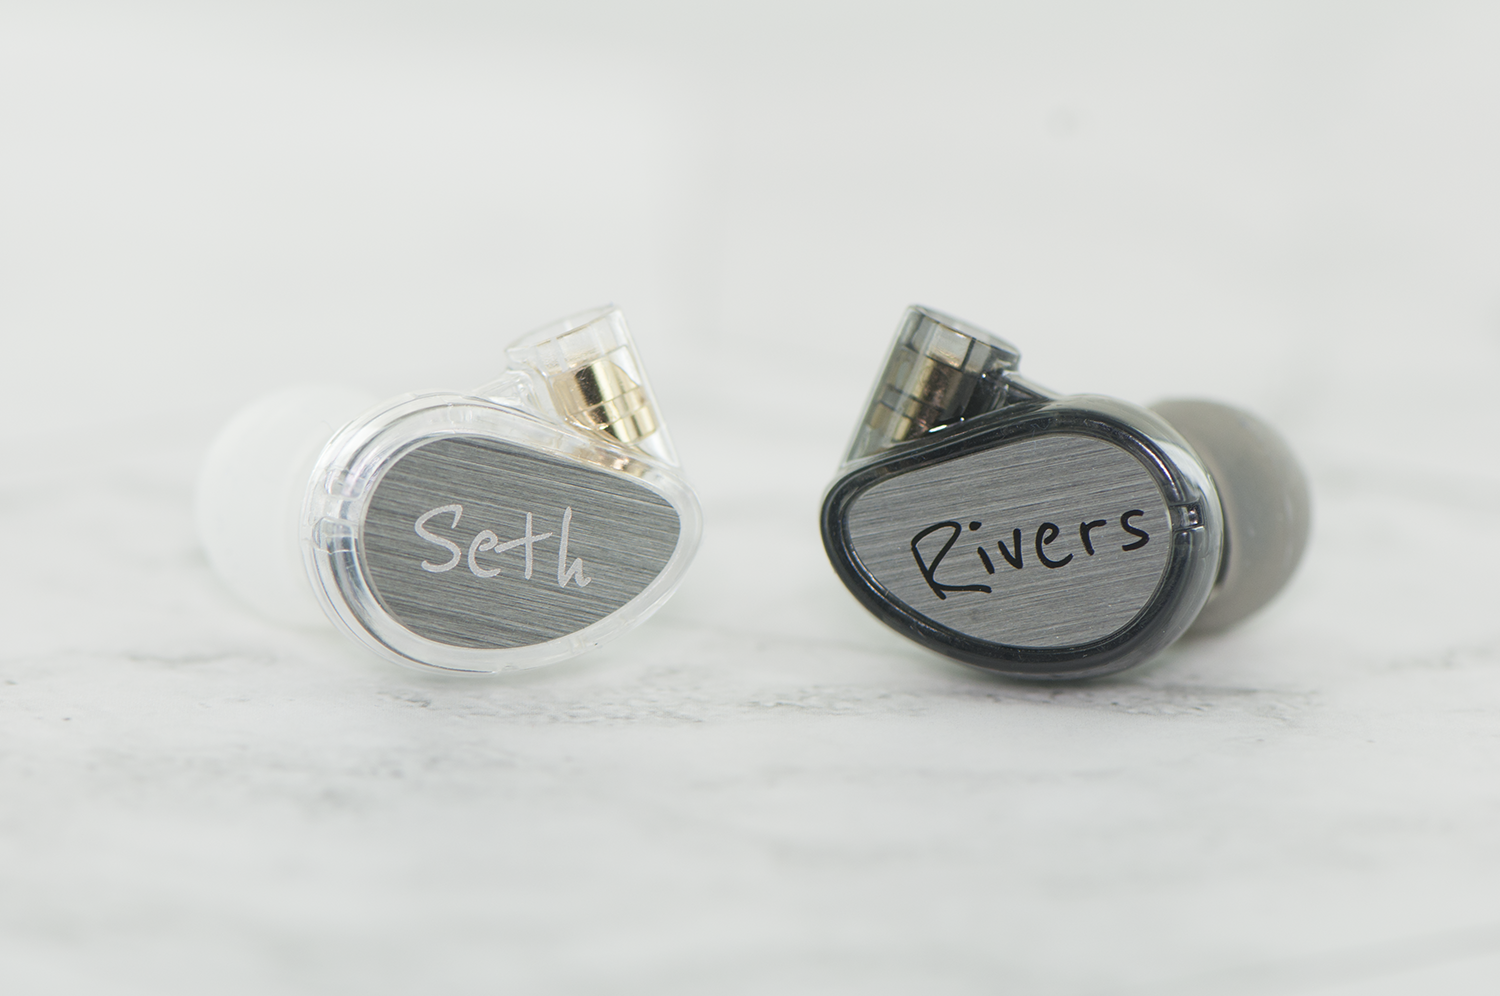 Two custom earphones with names "seth" and "rivers" inscribed on metallic surfaces, lying against a white marble background.